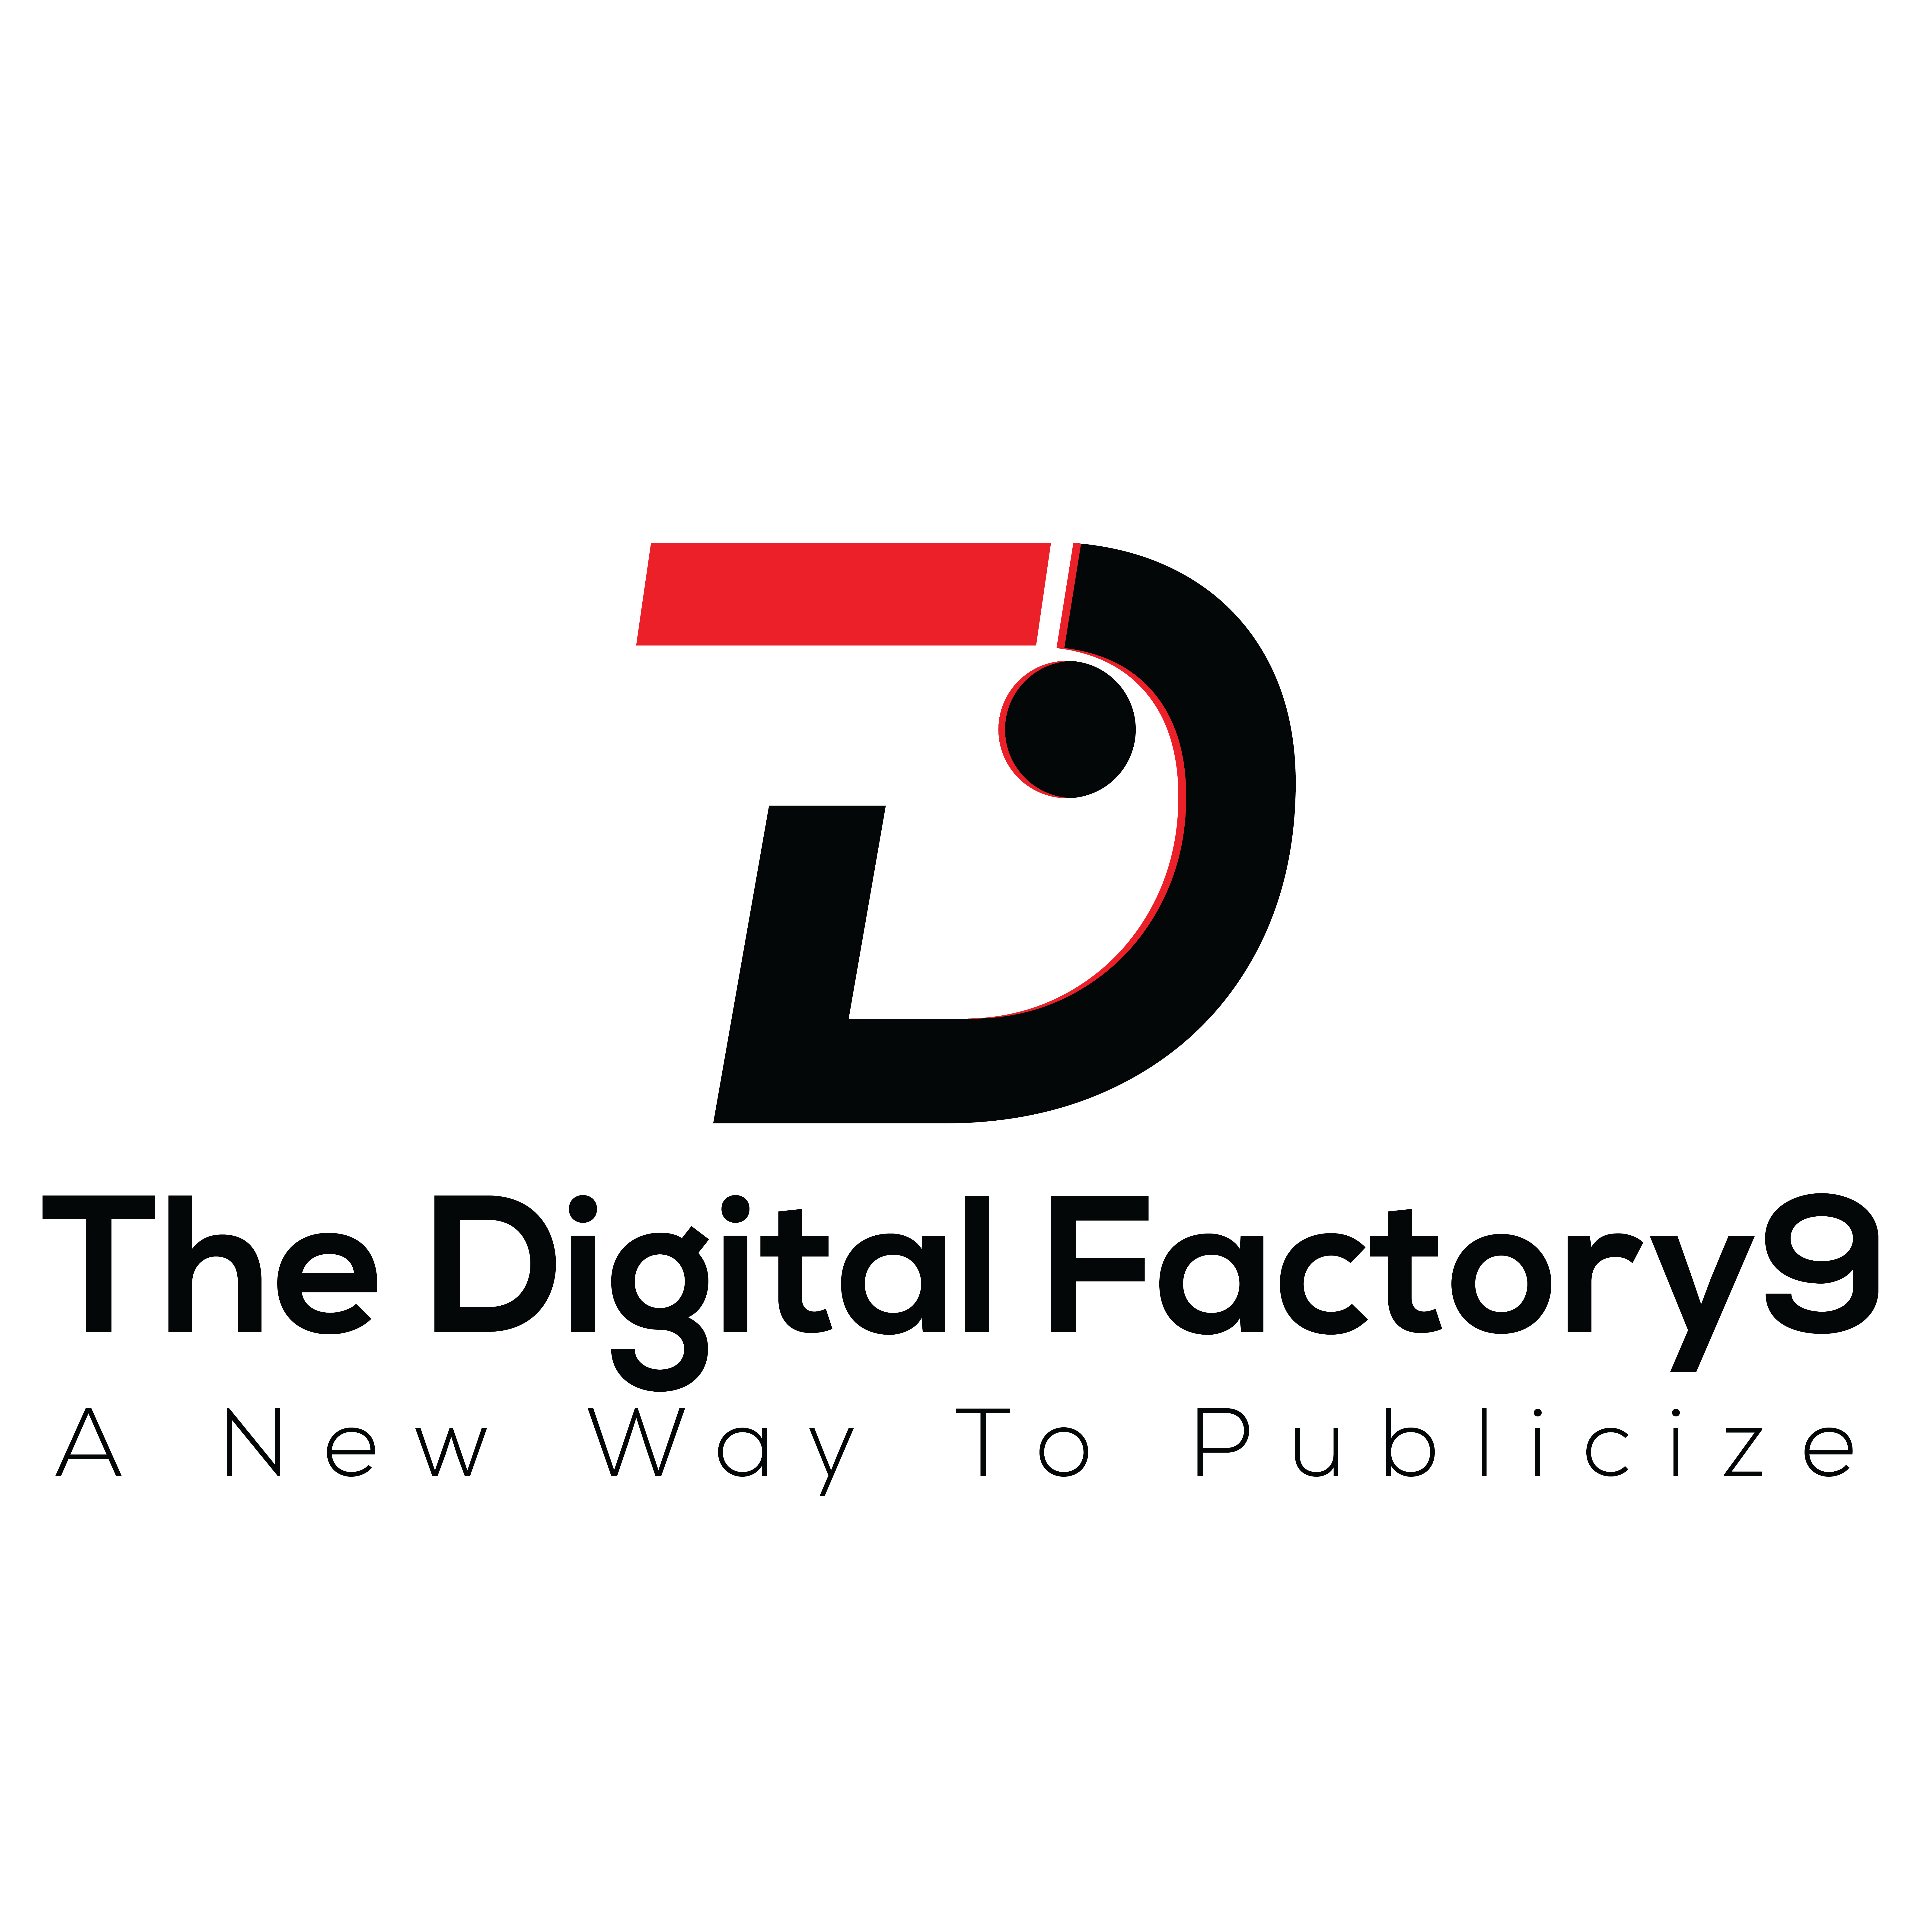 The Digital Factory9